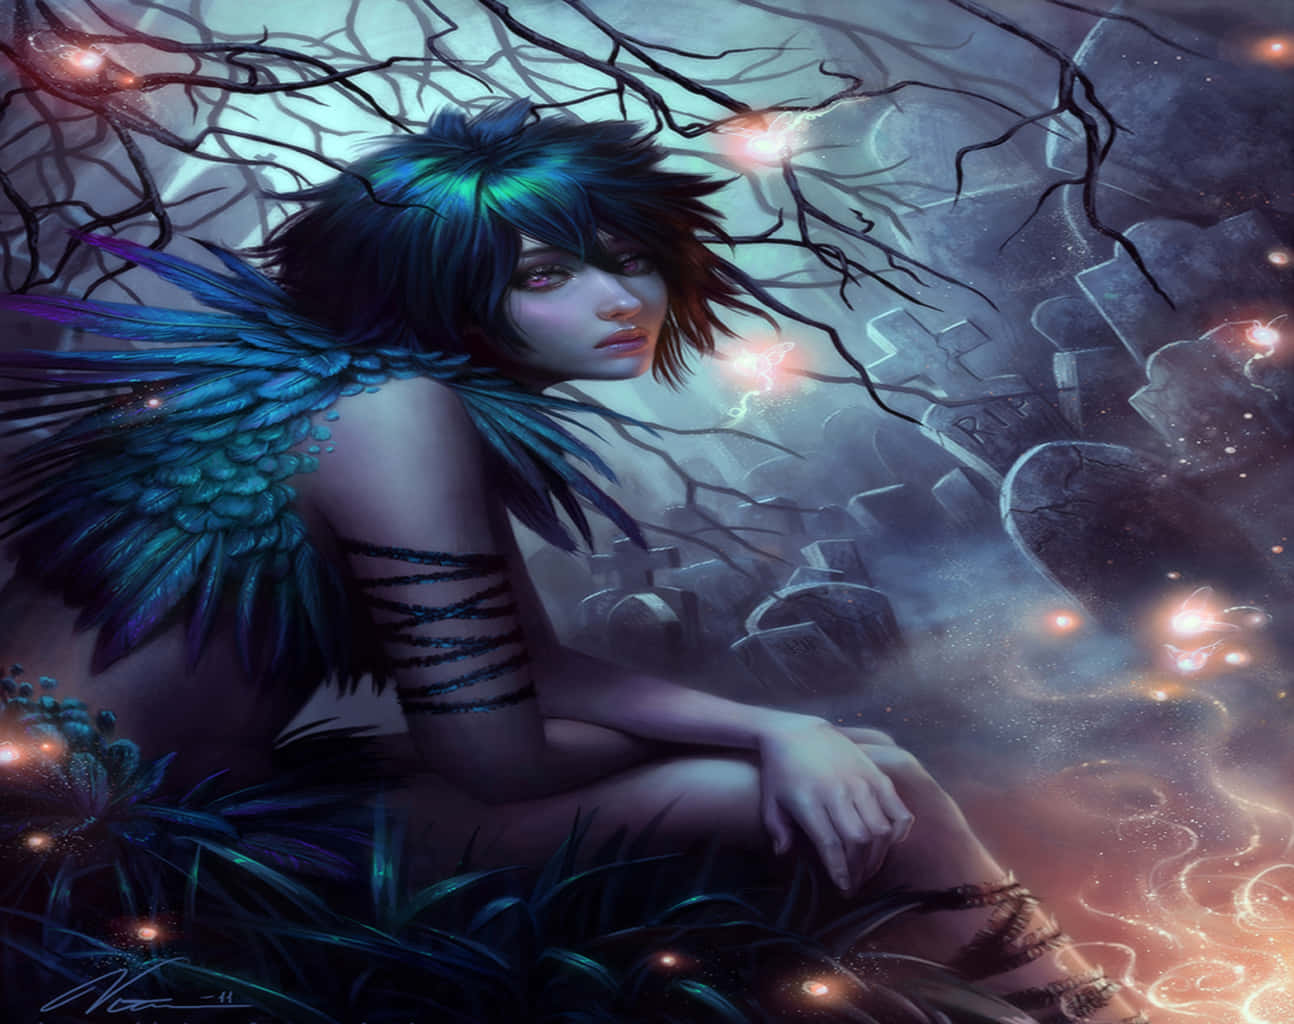 A Girl With Wings Sitting On The Ground Wallpaper